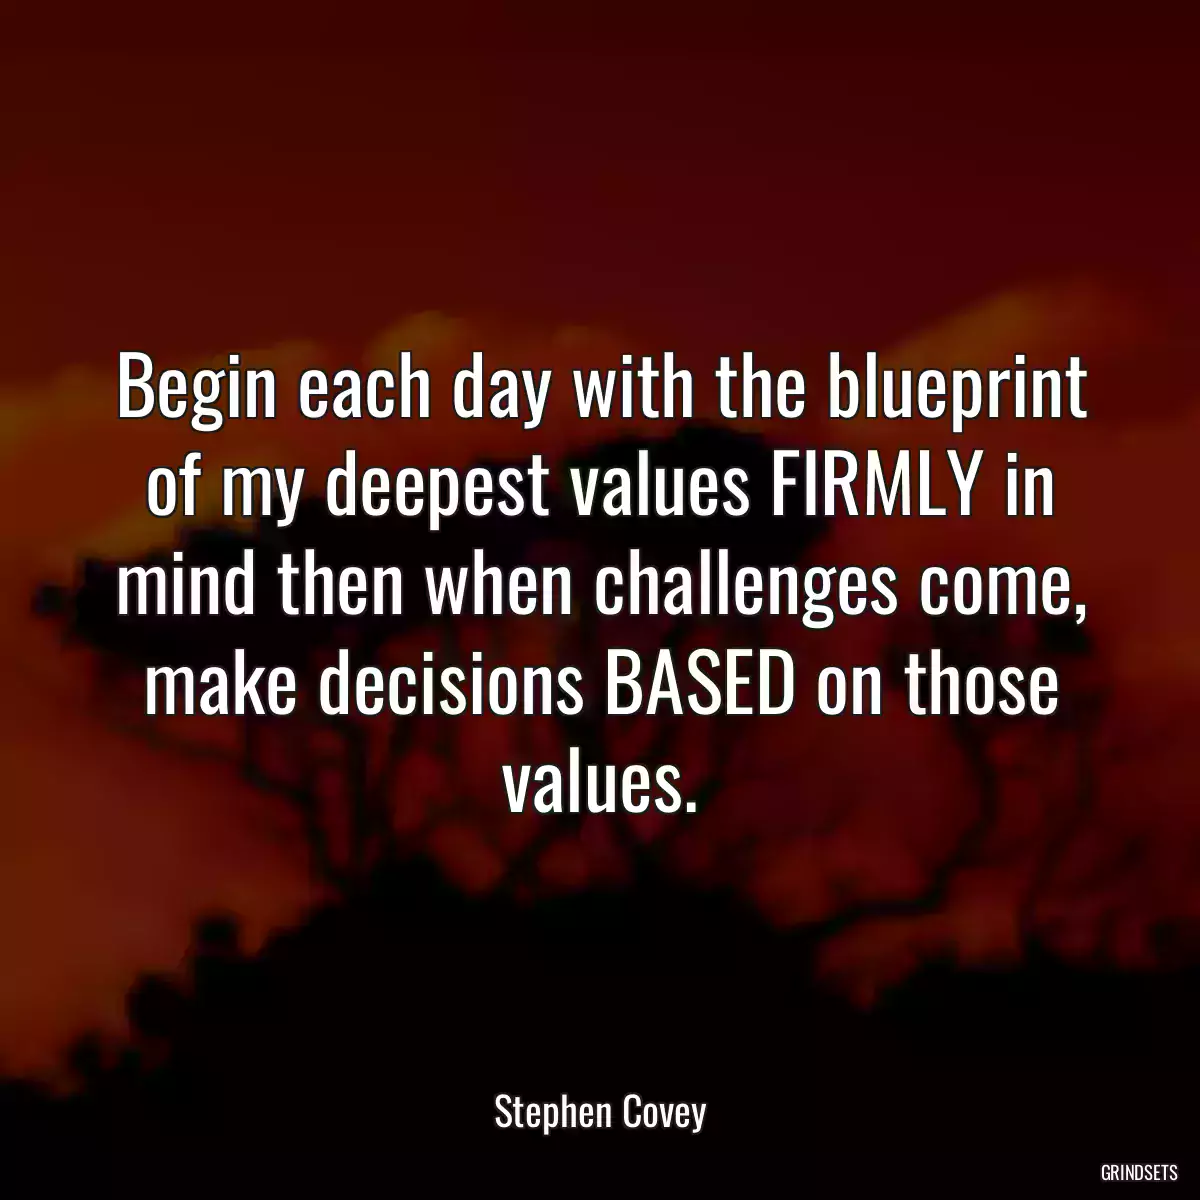 Begin each day with the blueprint of my deepest values FIRMLY in mind then when challenges come, make decisions BASED on those values.